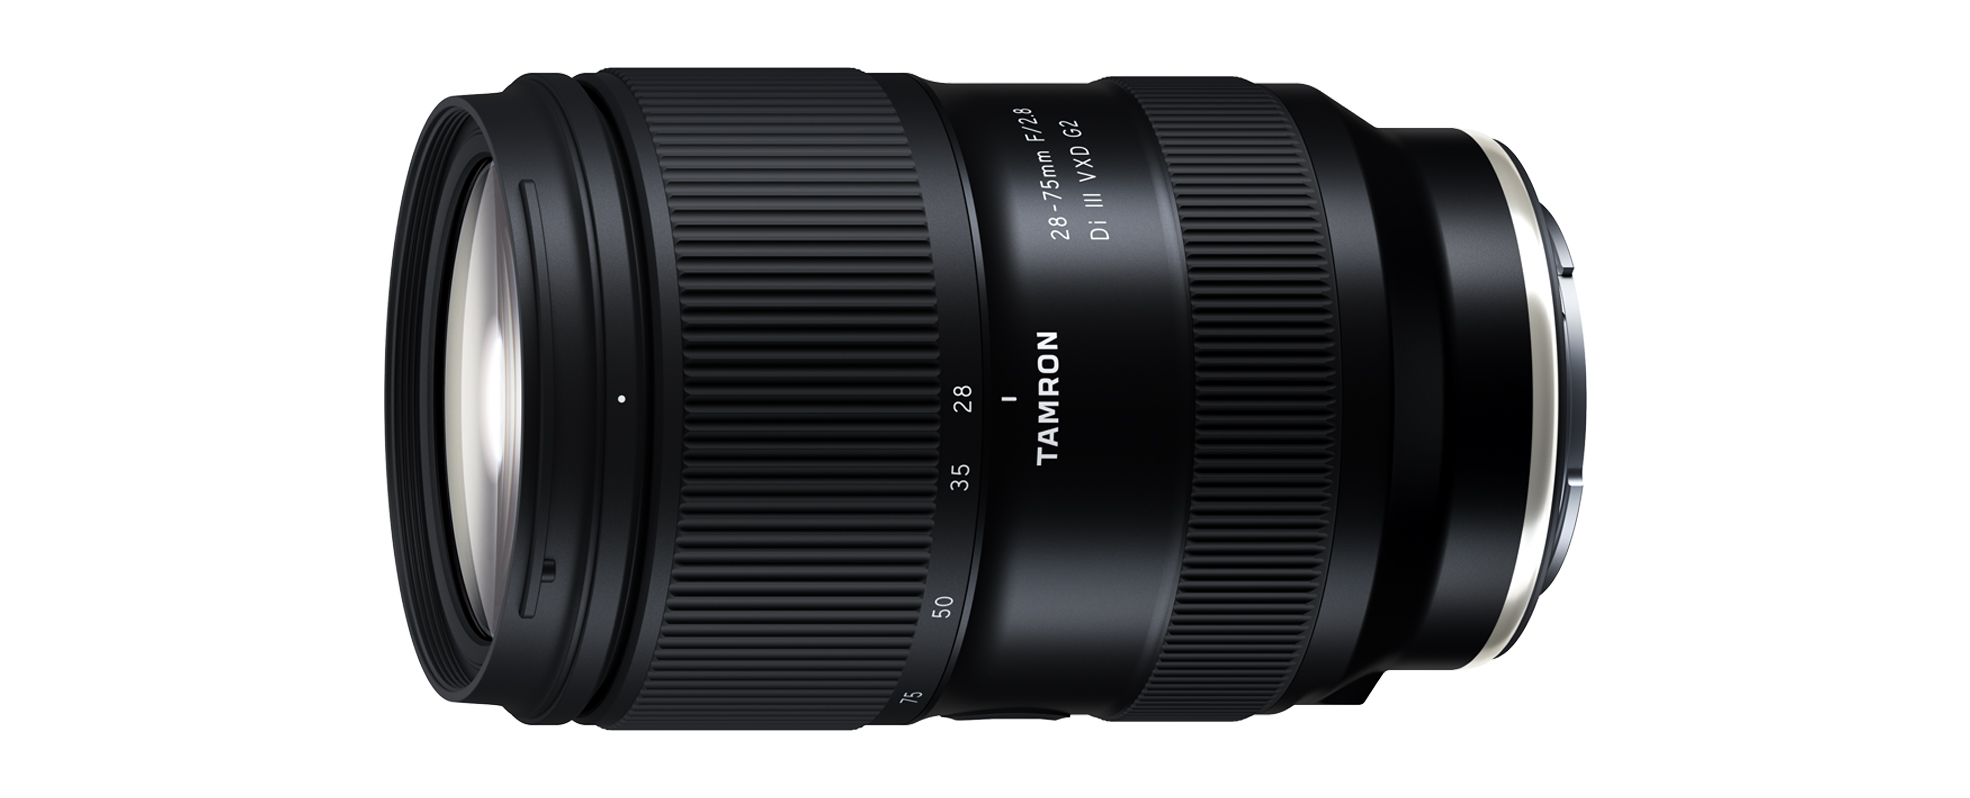 Product Page | 28-75mm F/2.8 Di III VXD G2 (Model A063) - TAMRON